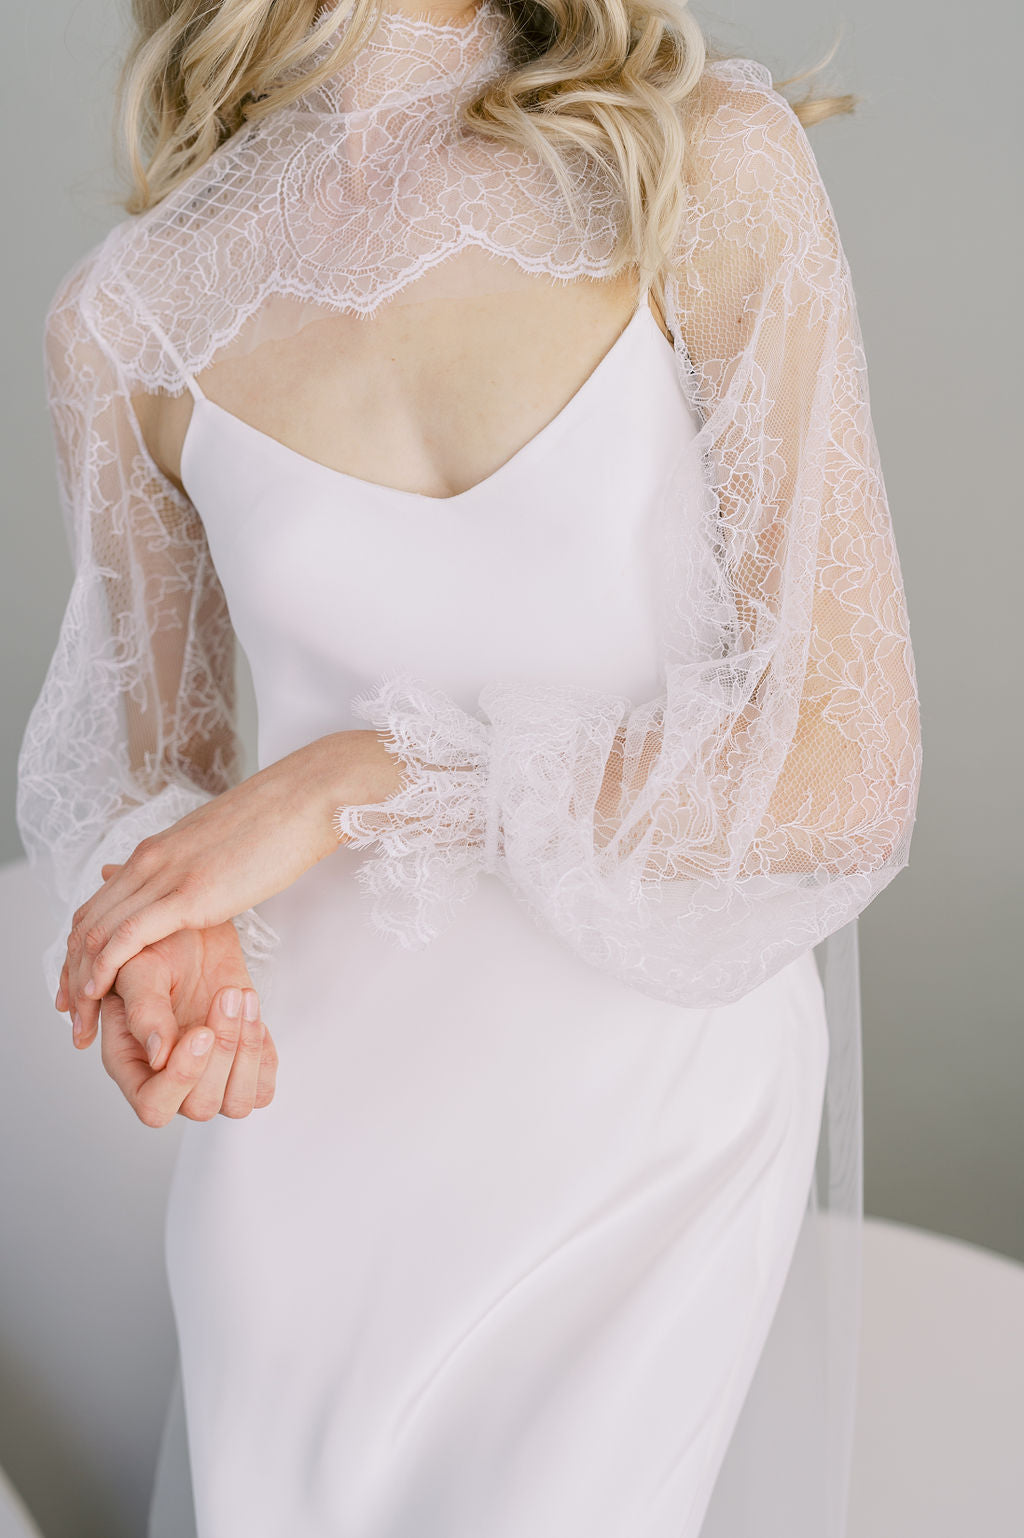 Long lace tulle wedding cape. Full lace poet sleeves. Handmade by Catherine Langlois, Toronto, Canada